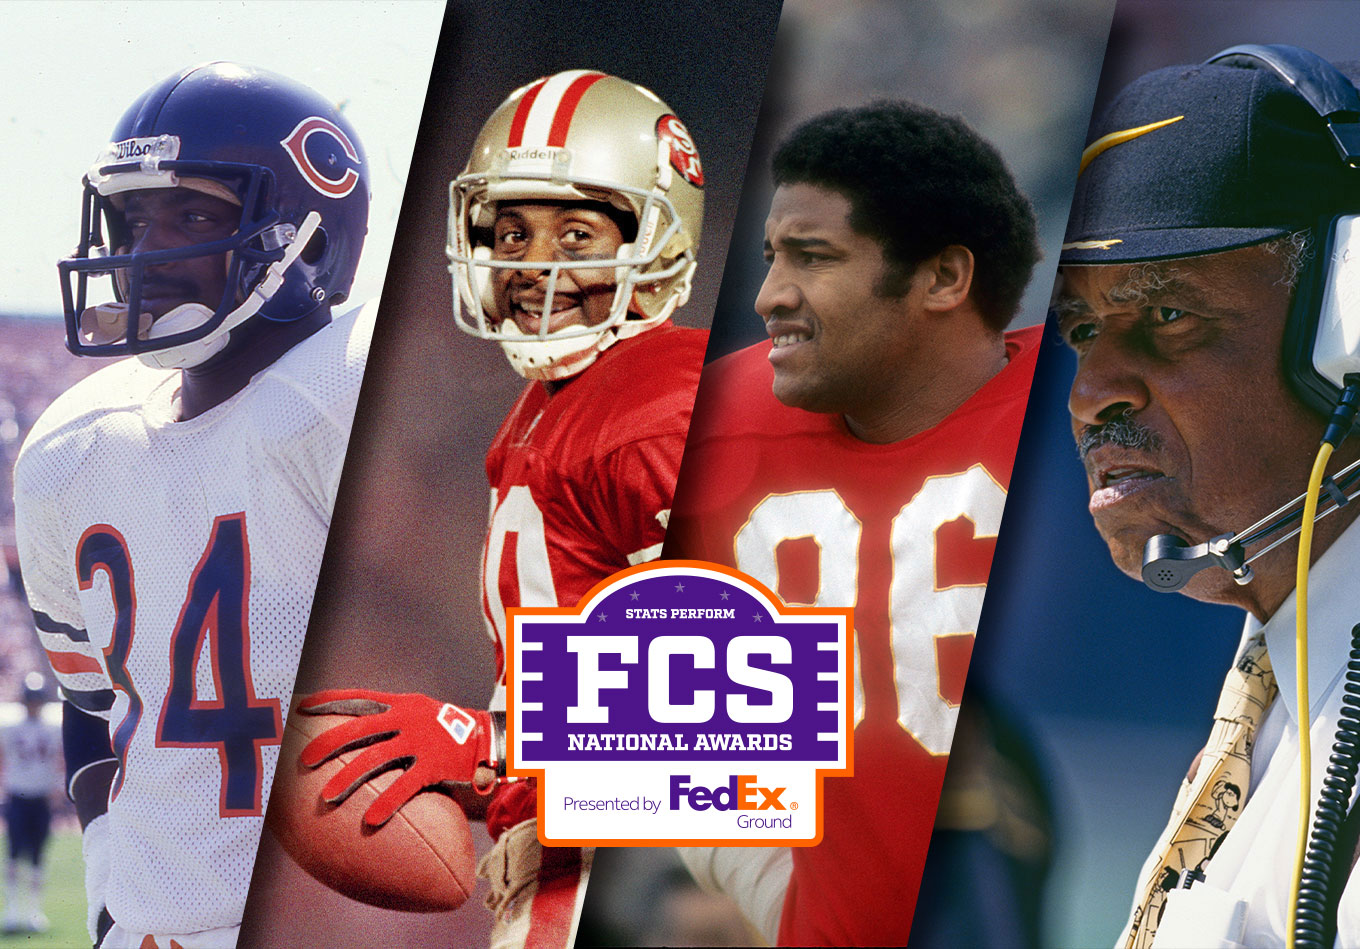 FCS National Awards: A List of the All-Time Recipients